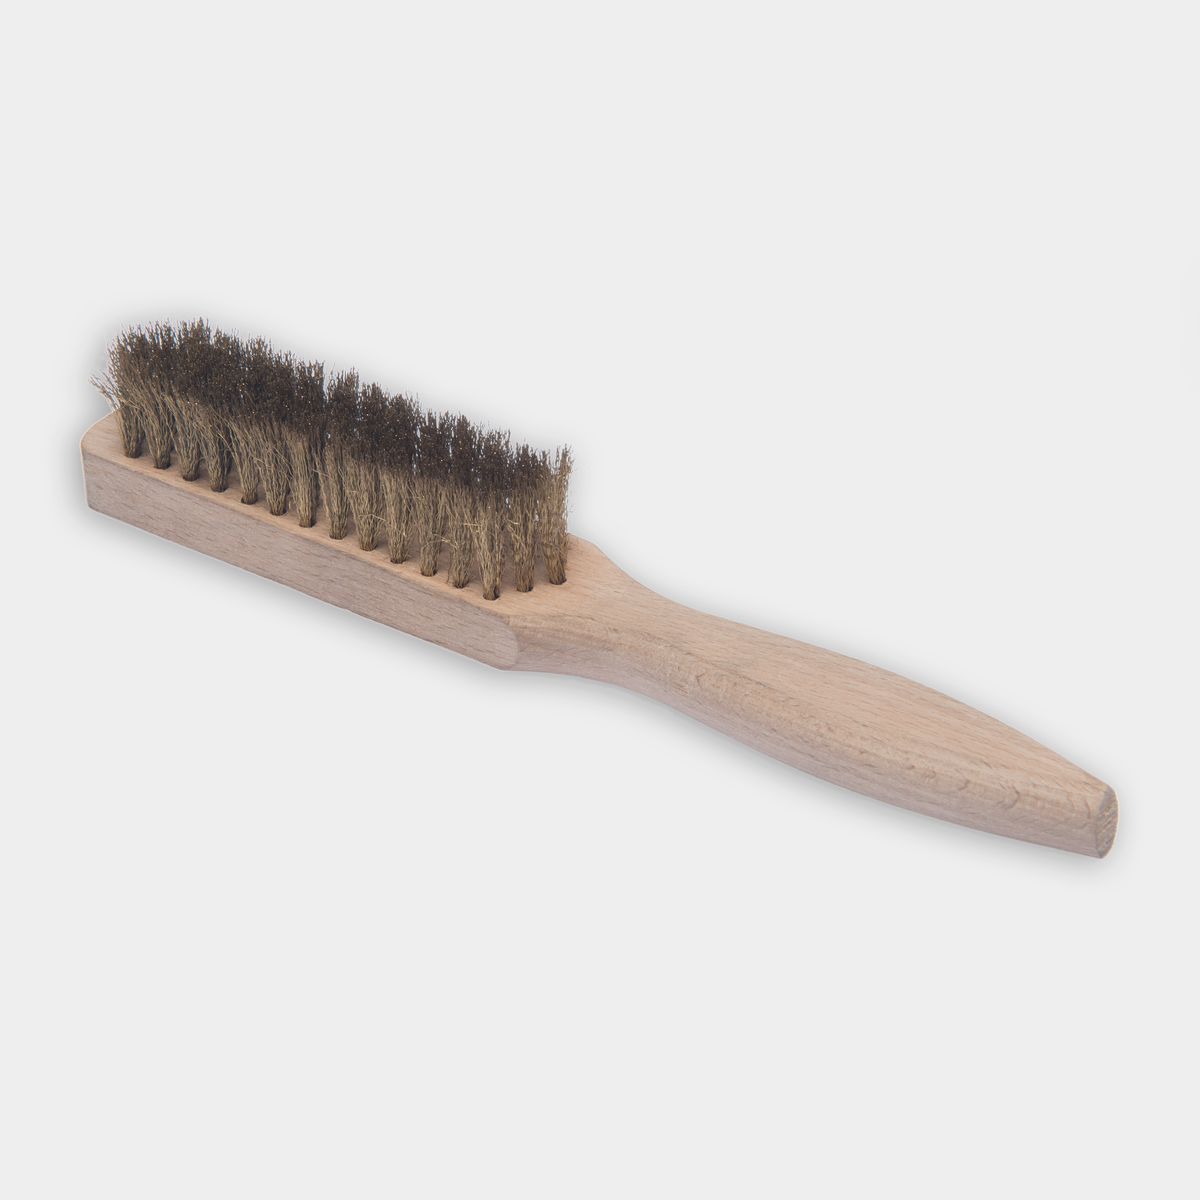 Wooden handled wire brush